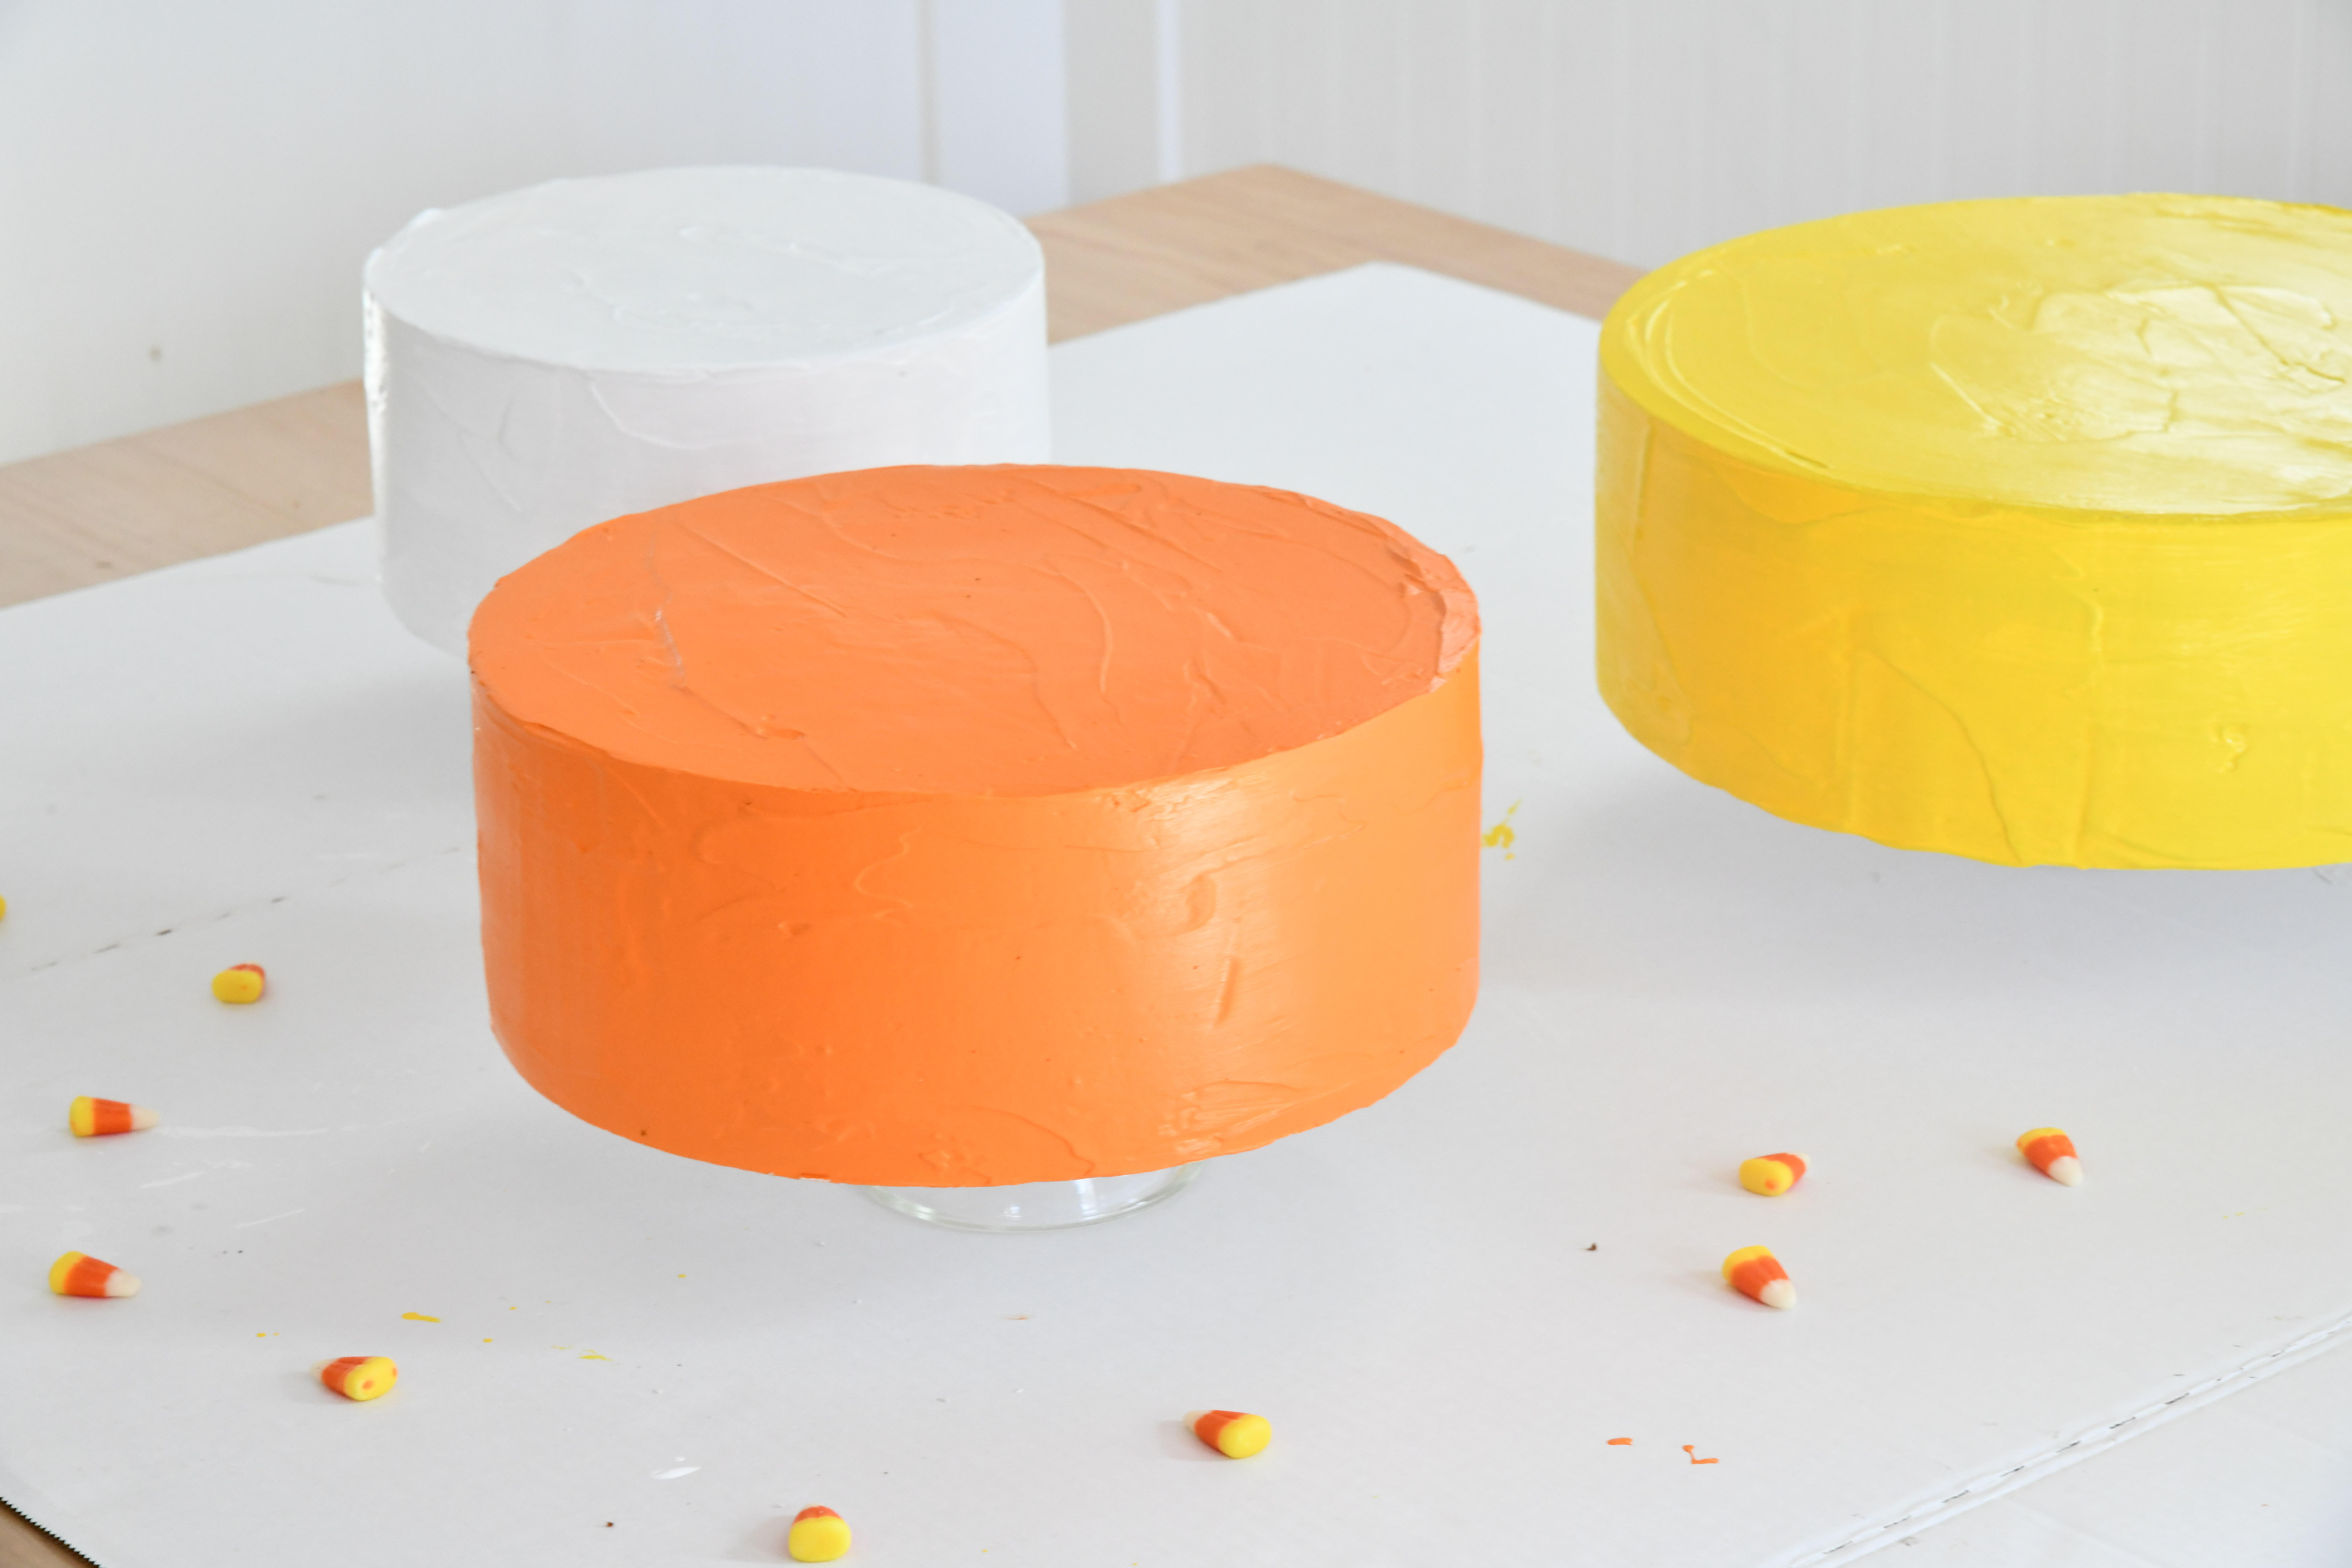 How To Make a Faux Cake: Three painted cakes on table one orange, one white, one yellow